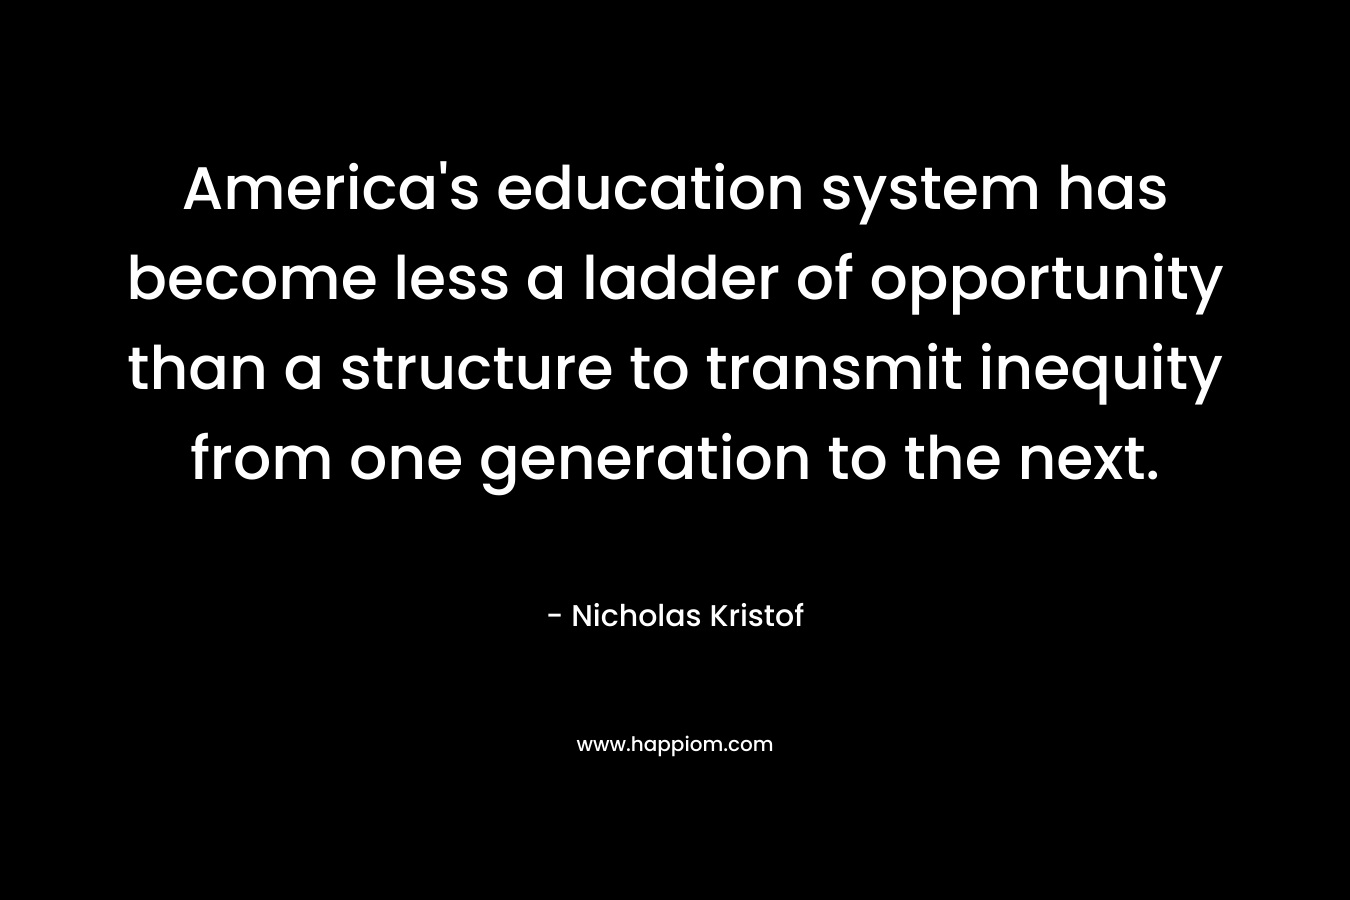 America’s education system has become less a ladder of opportunity than a structure to transmit inequity from one generation to the next. – Nicholas Kristof